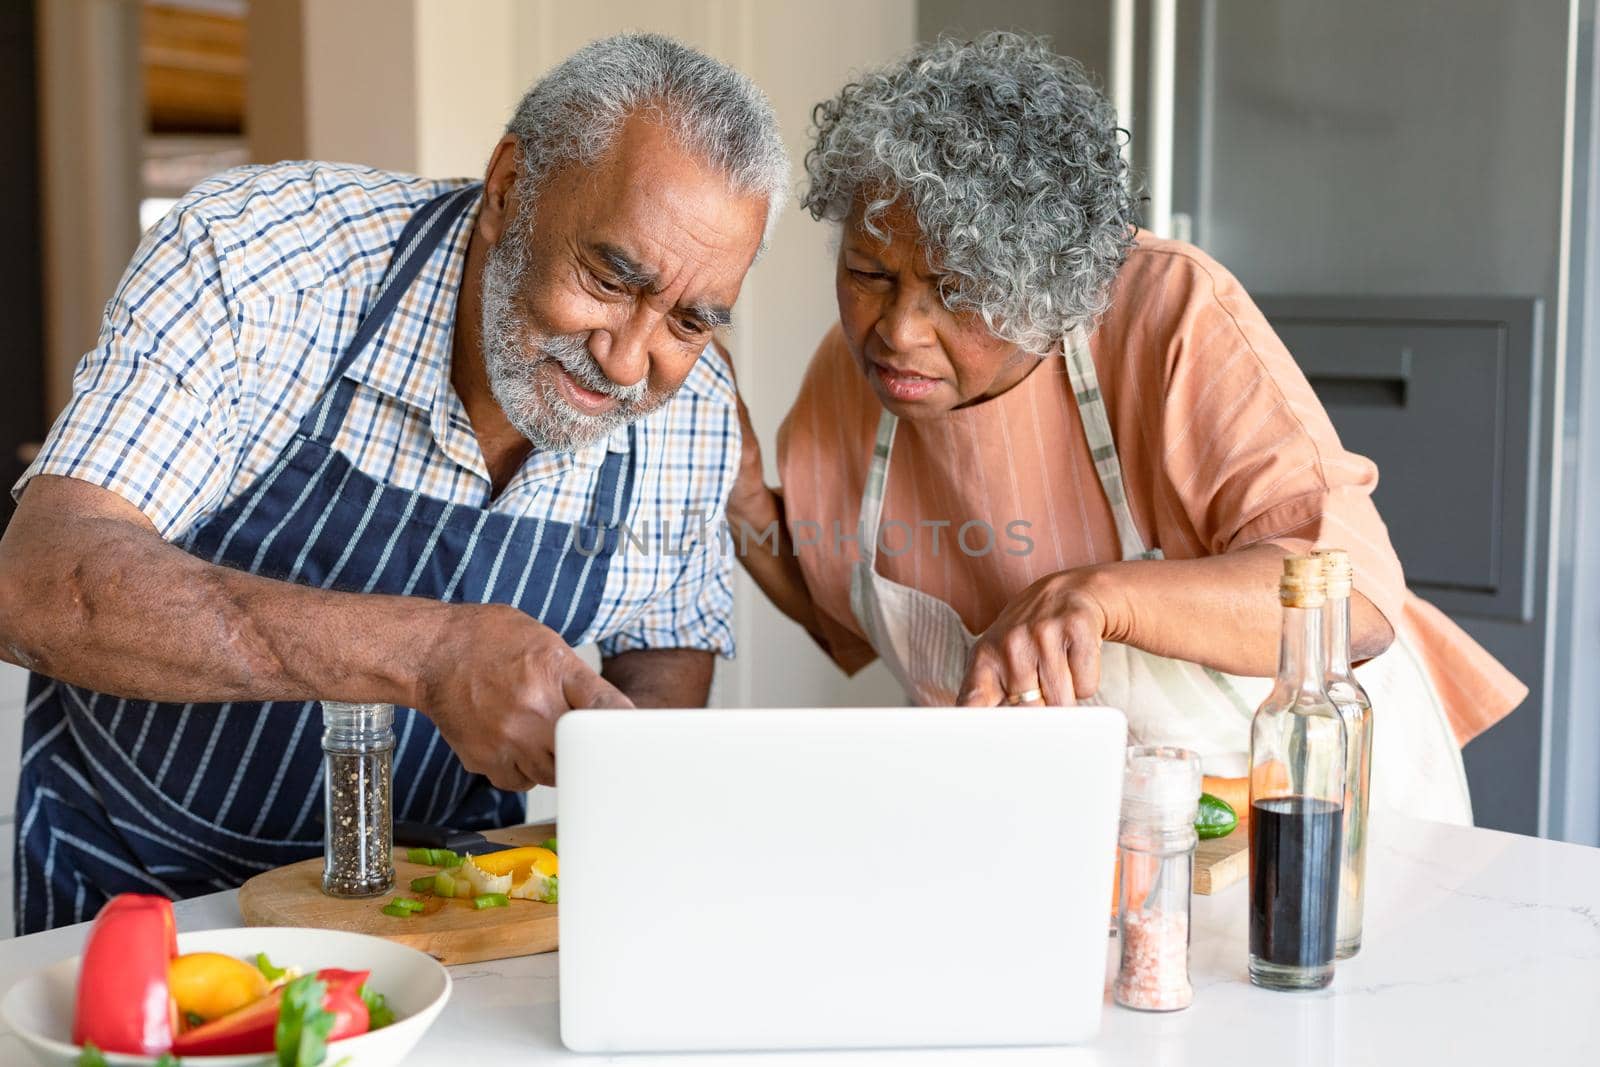 Happy arfican american senior couple preparing meal together and using laptop by Wavebreakmedia